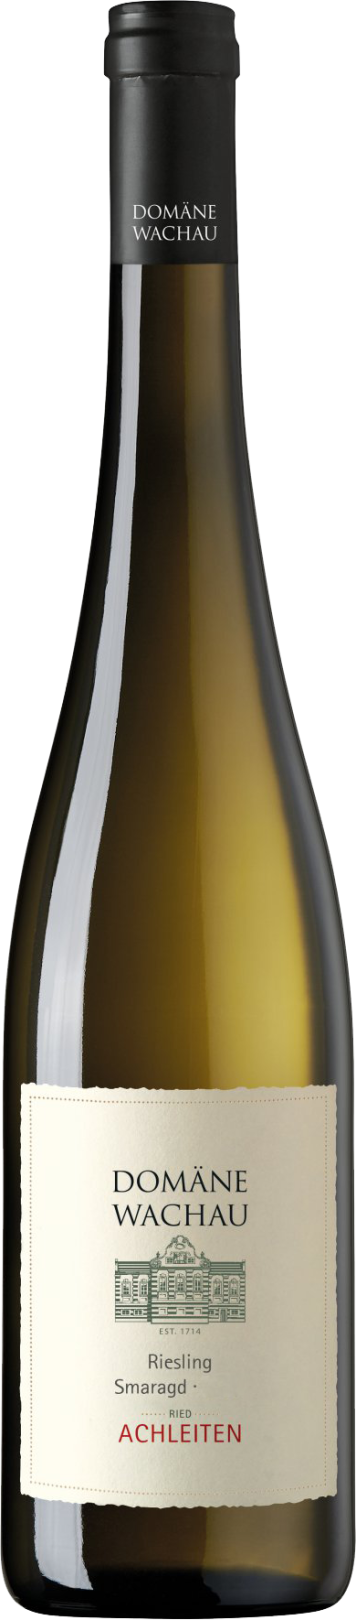 Ried Achleiten Riesling Smaragd